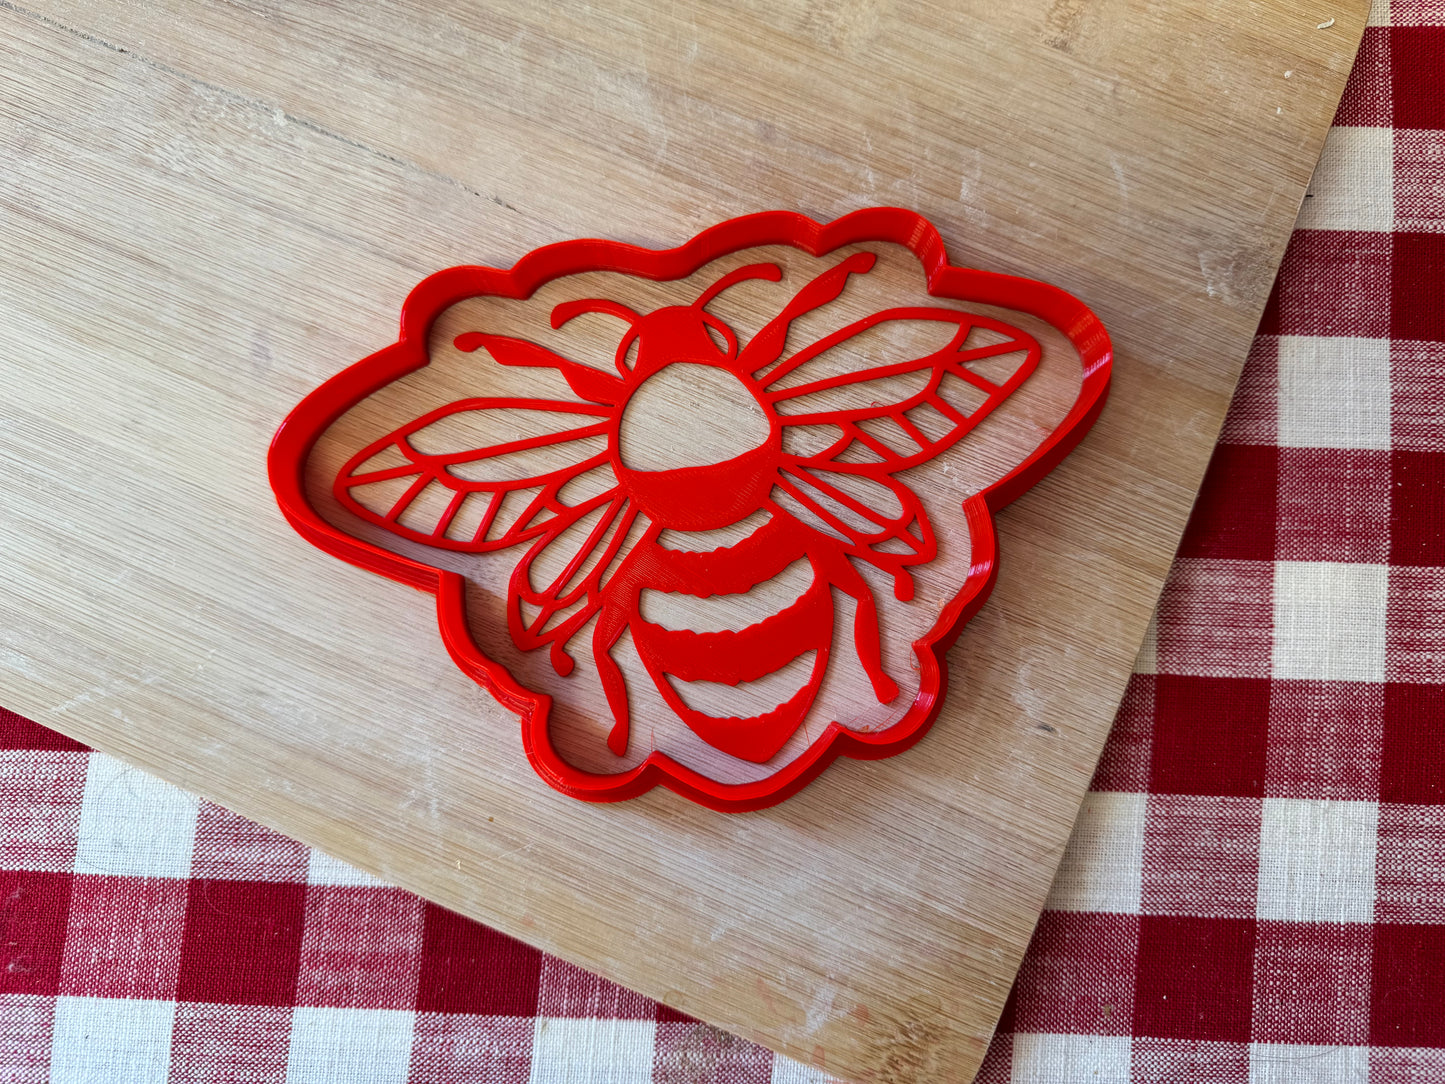 Bee 1 design - plastic 3D pottery stamp or stencil w/ optional cutter, multiple sizes